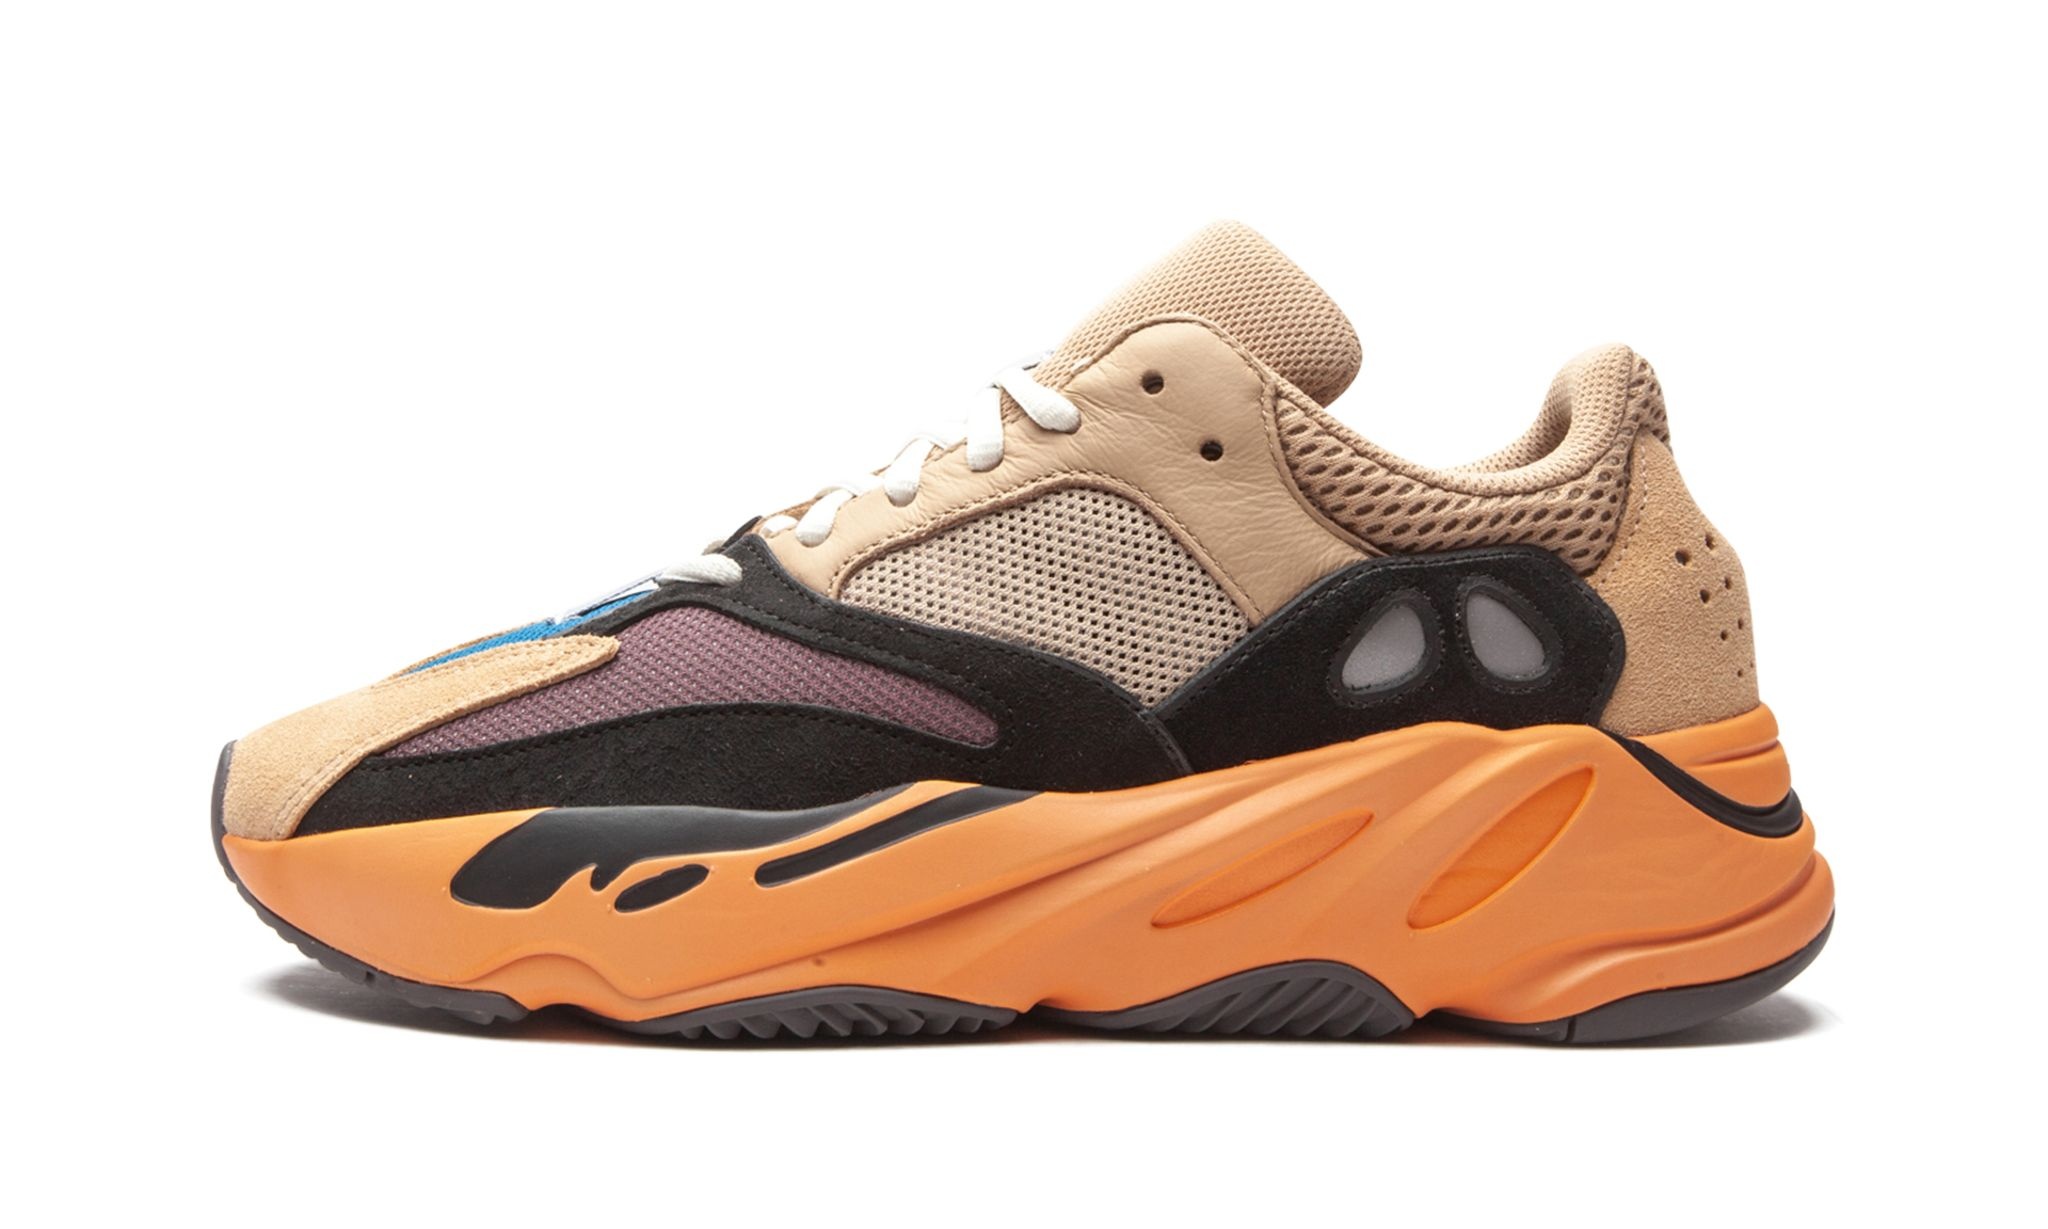 Yeezy Boost 700 "Enflame Amber" - 1